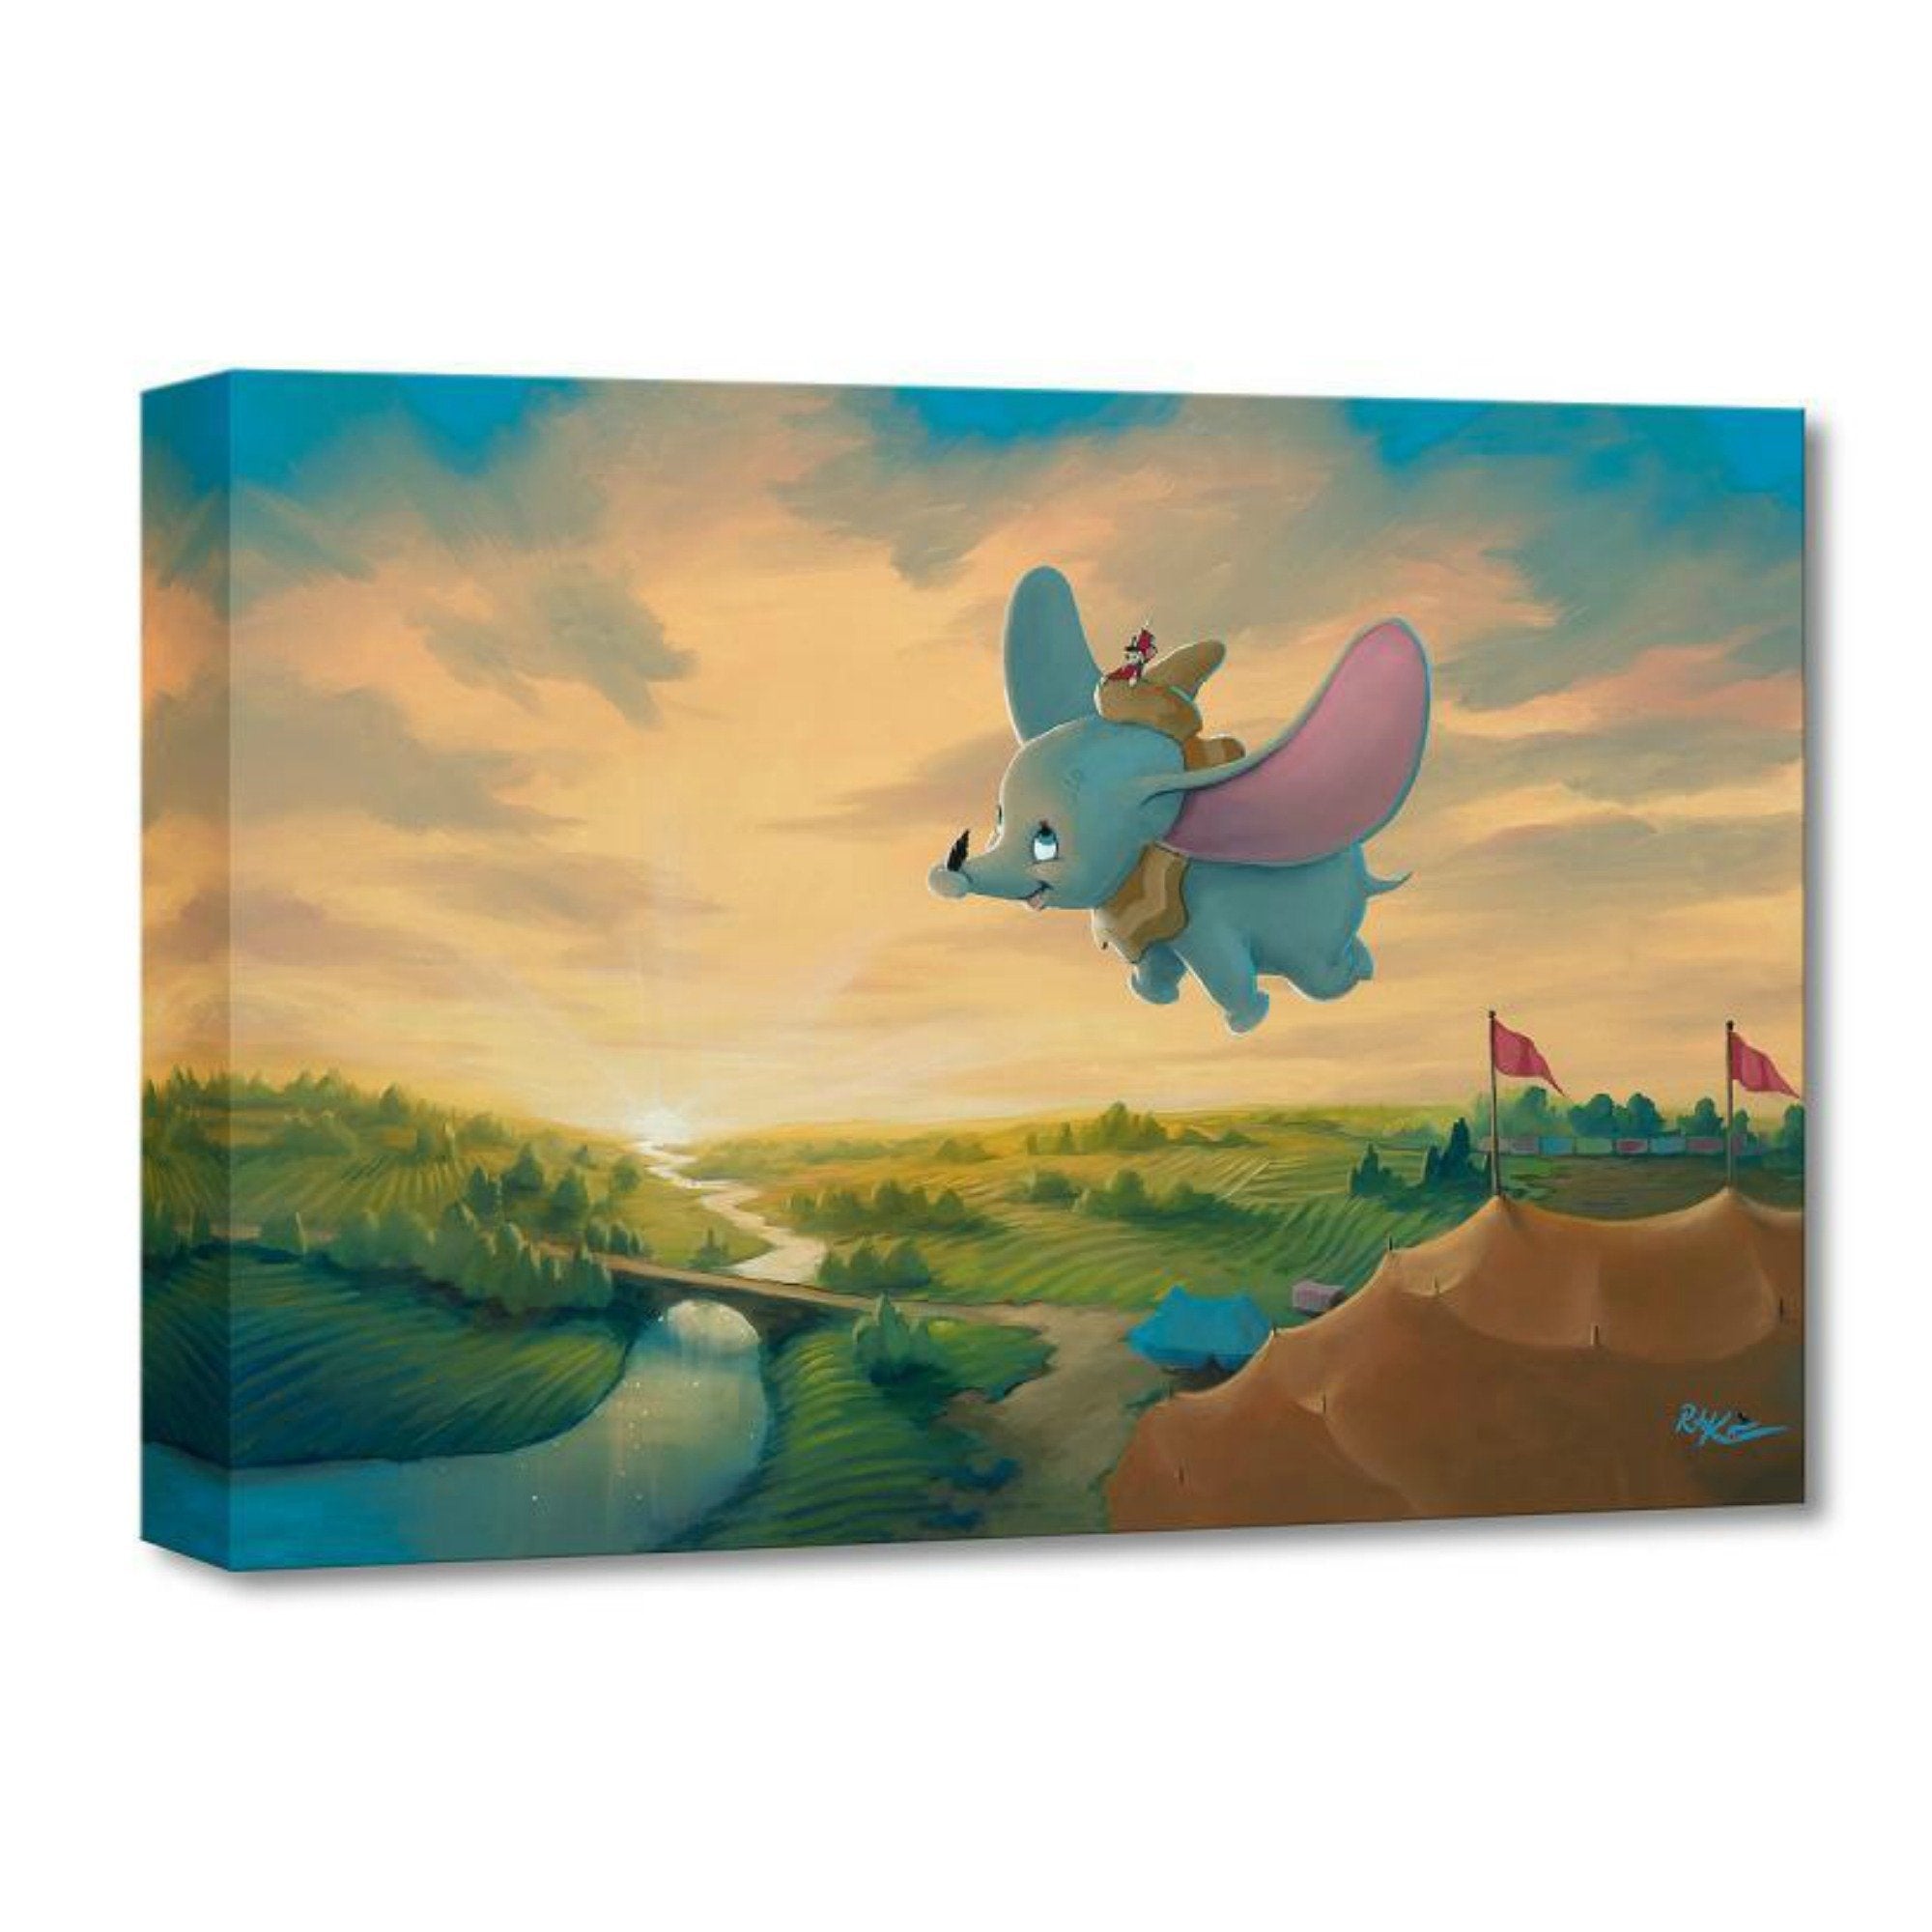 Flight Over the Big Top by Rob Kaz.   Timothy the mouse sits on top of Dumbo's hat, as they fly around over the countryside and the carnival.